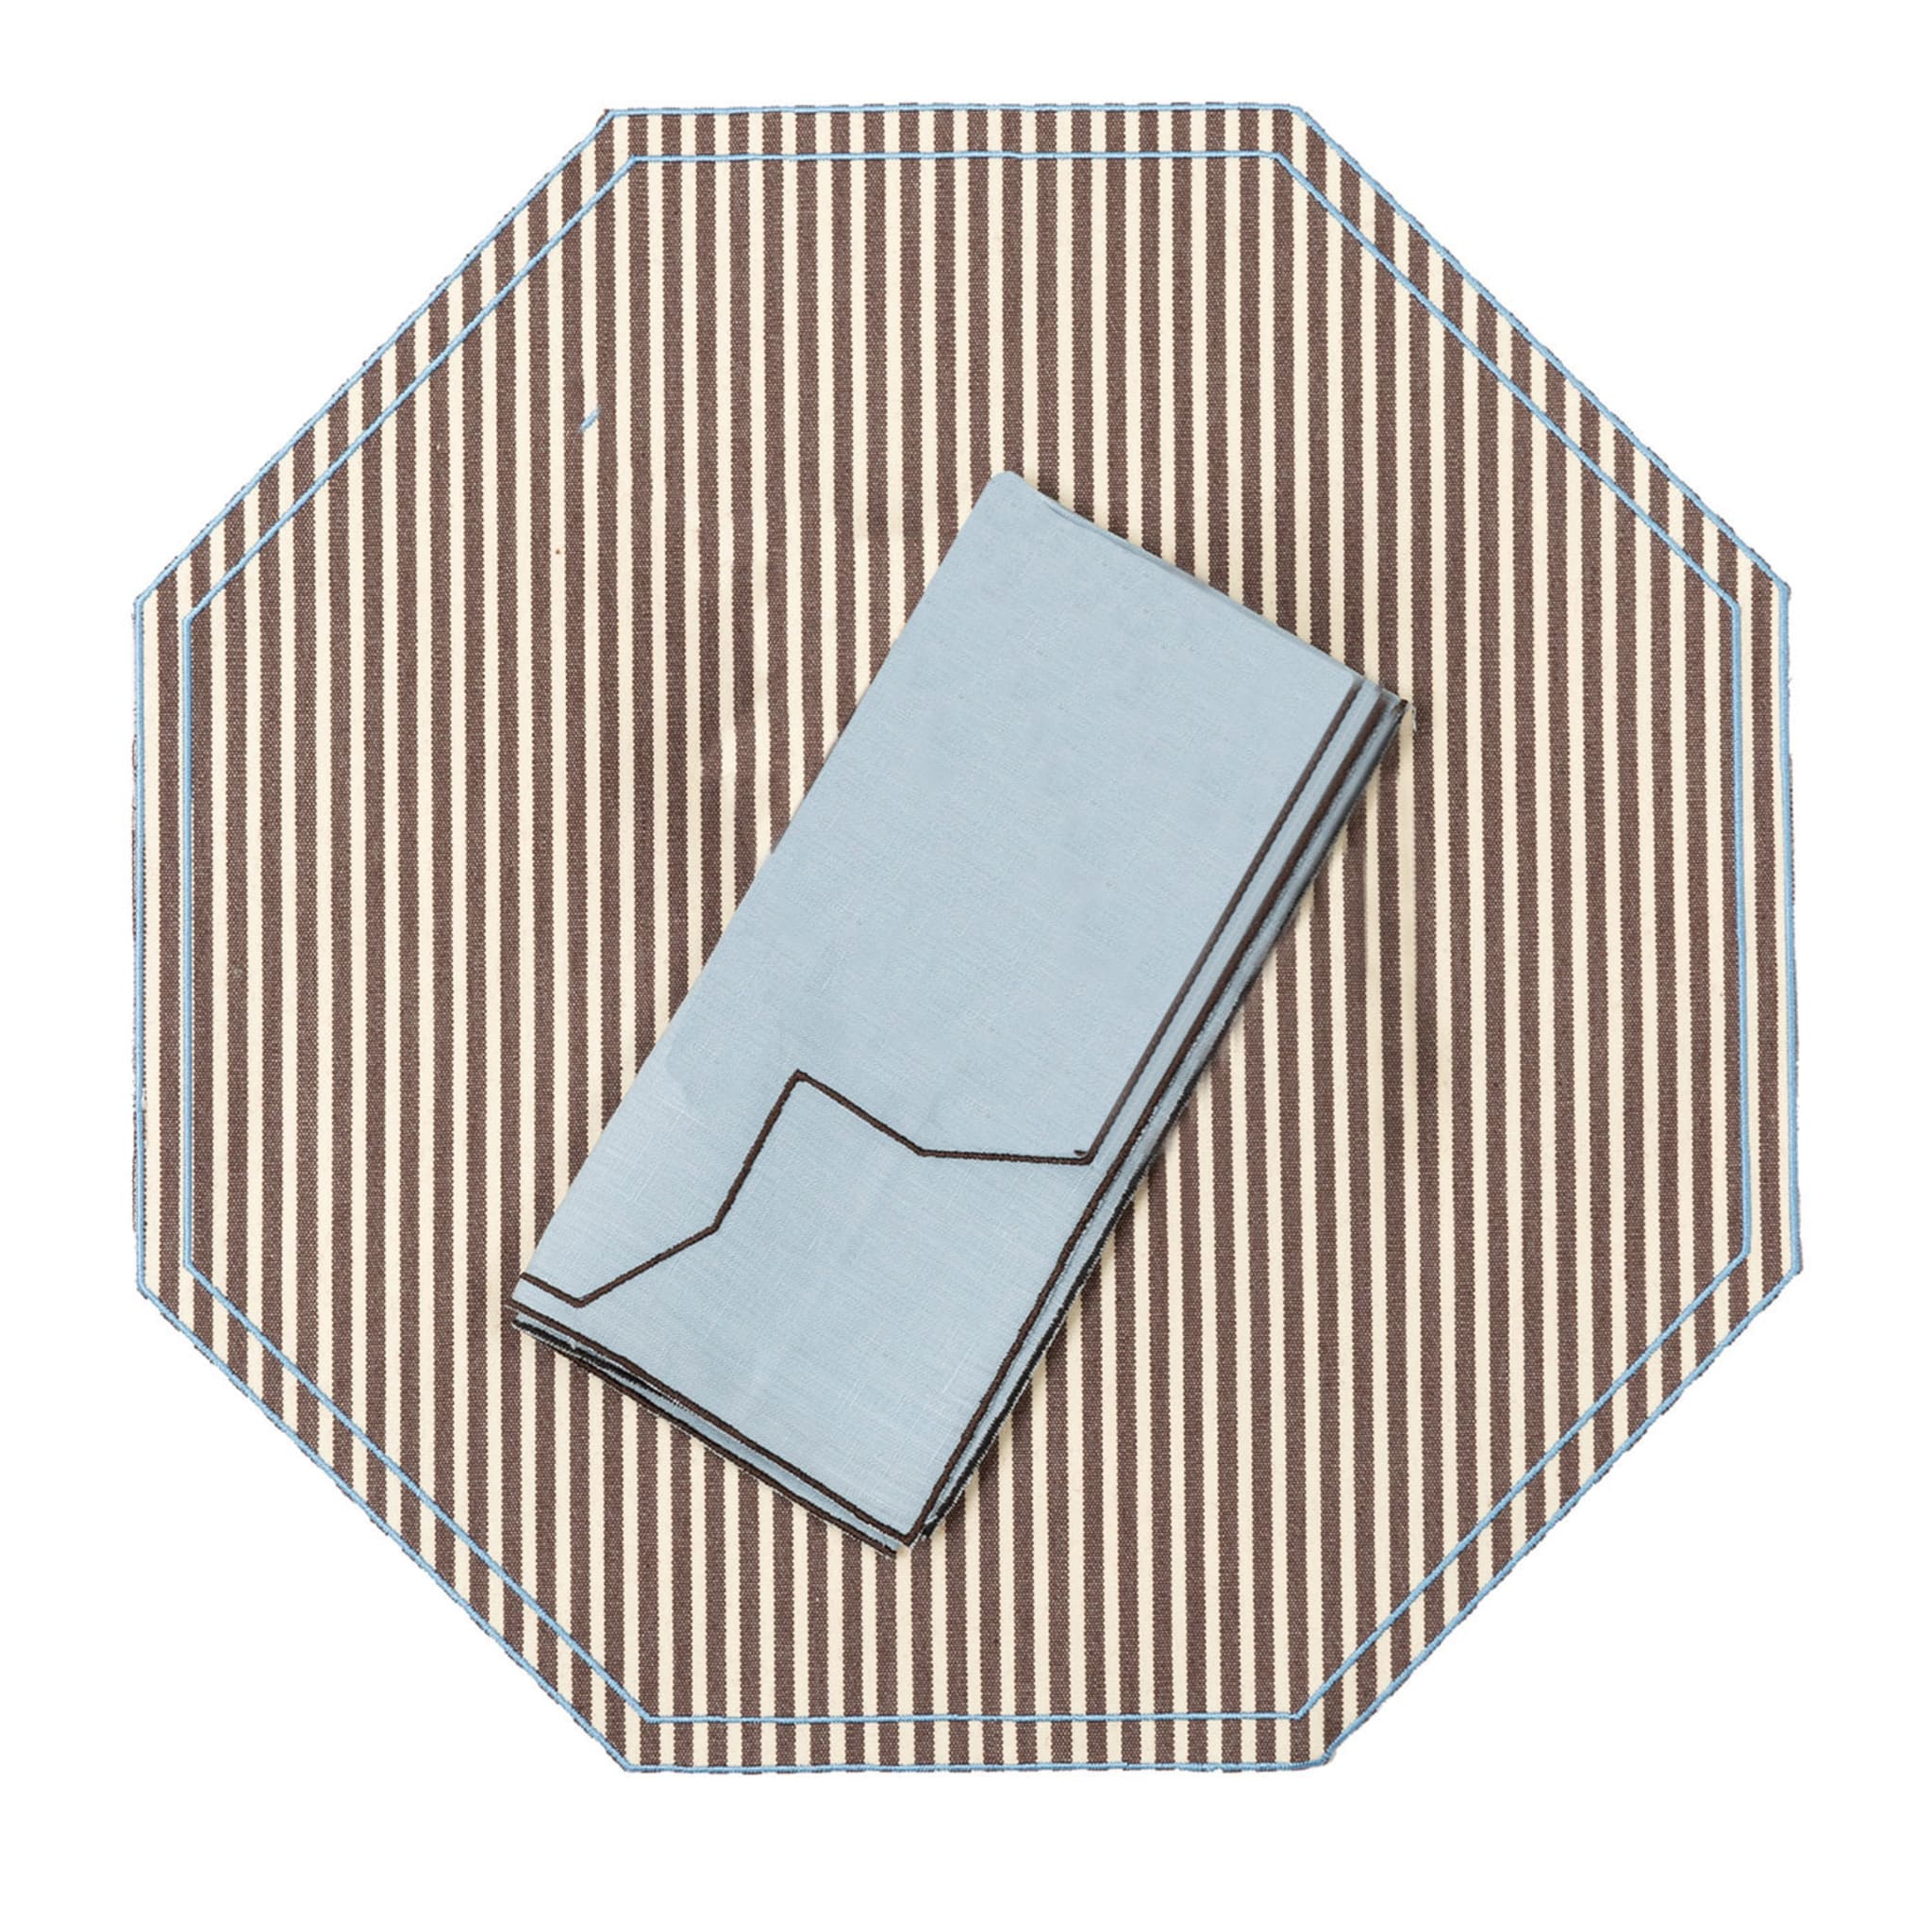 Mr Stripes Octagon Brown Placemat & Napkin - Main view